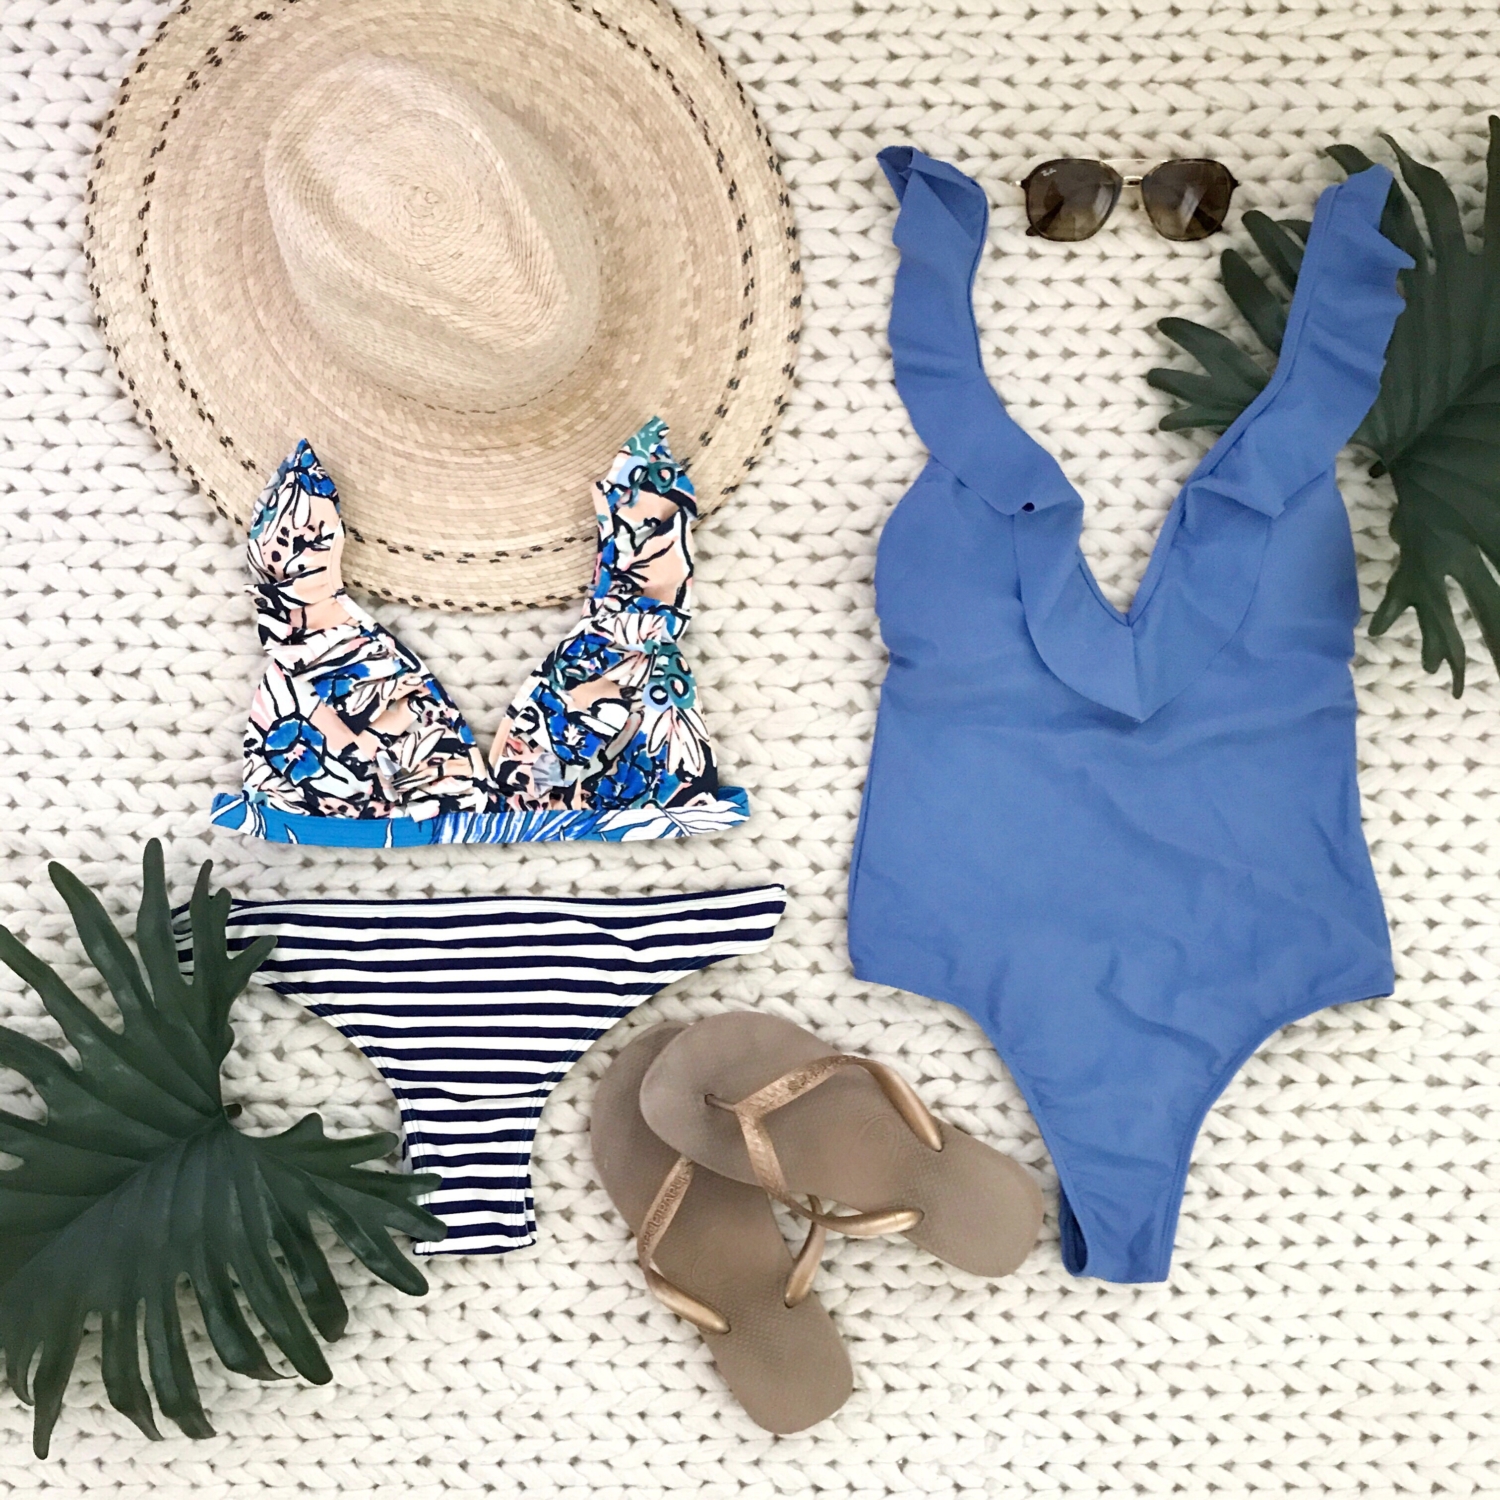 My Four Favorite Swimsuits For This Year - The Chronicles of Home